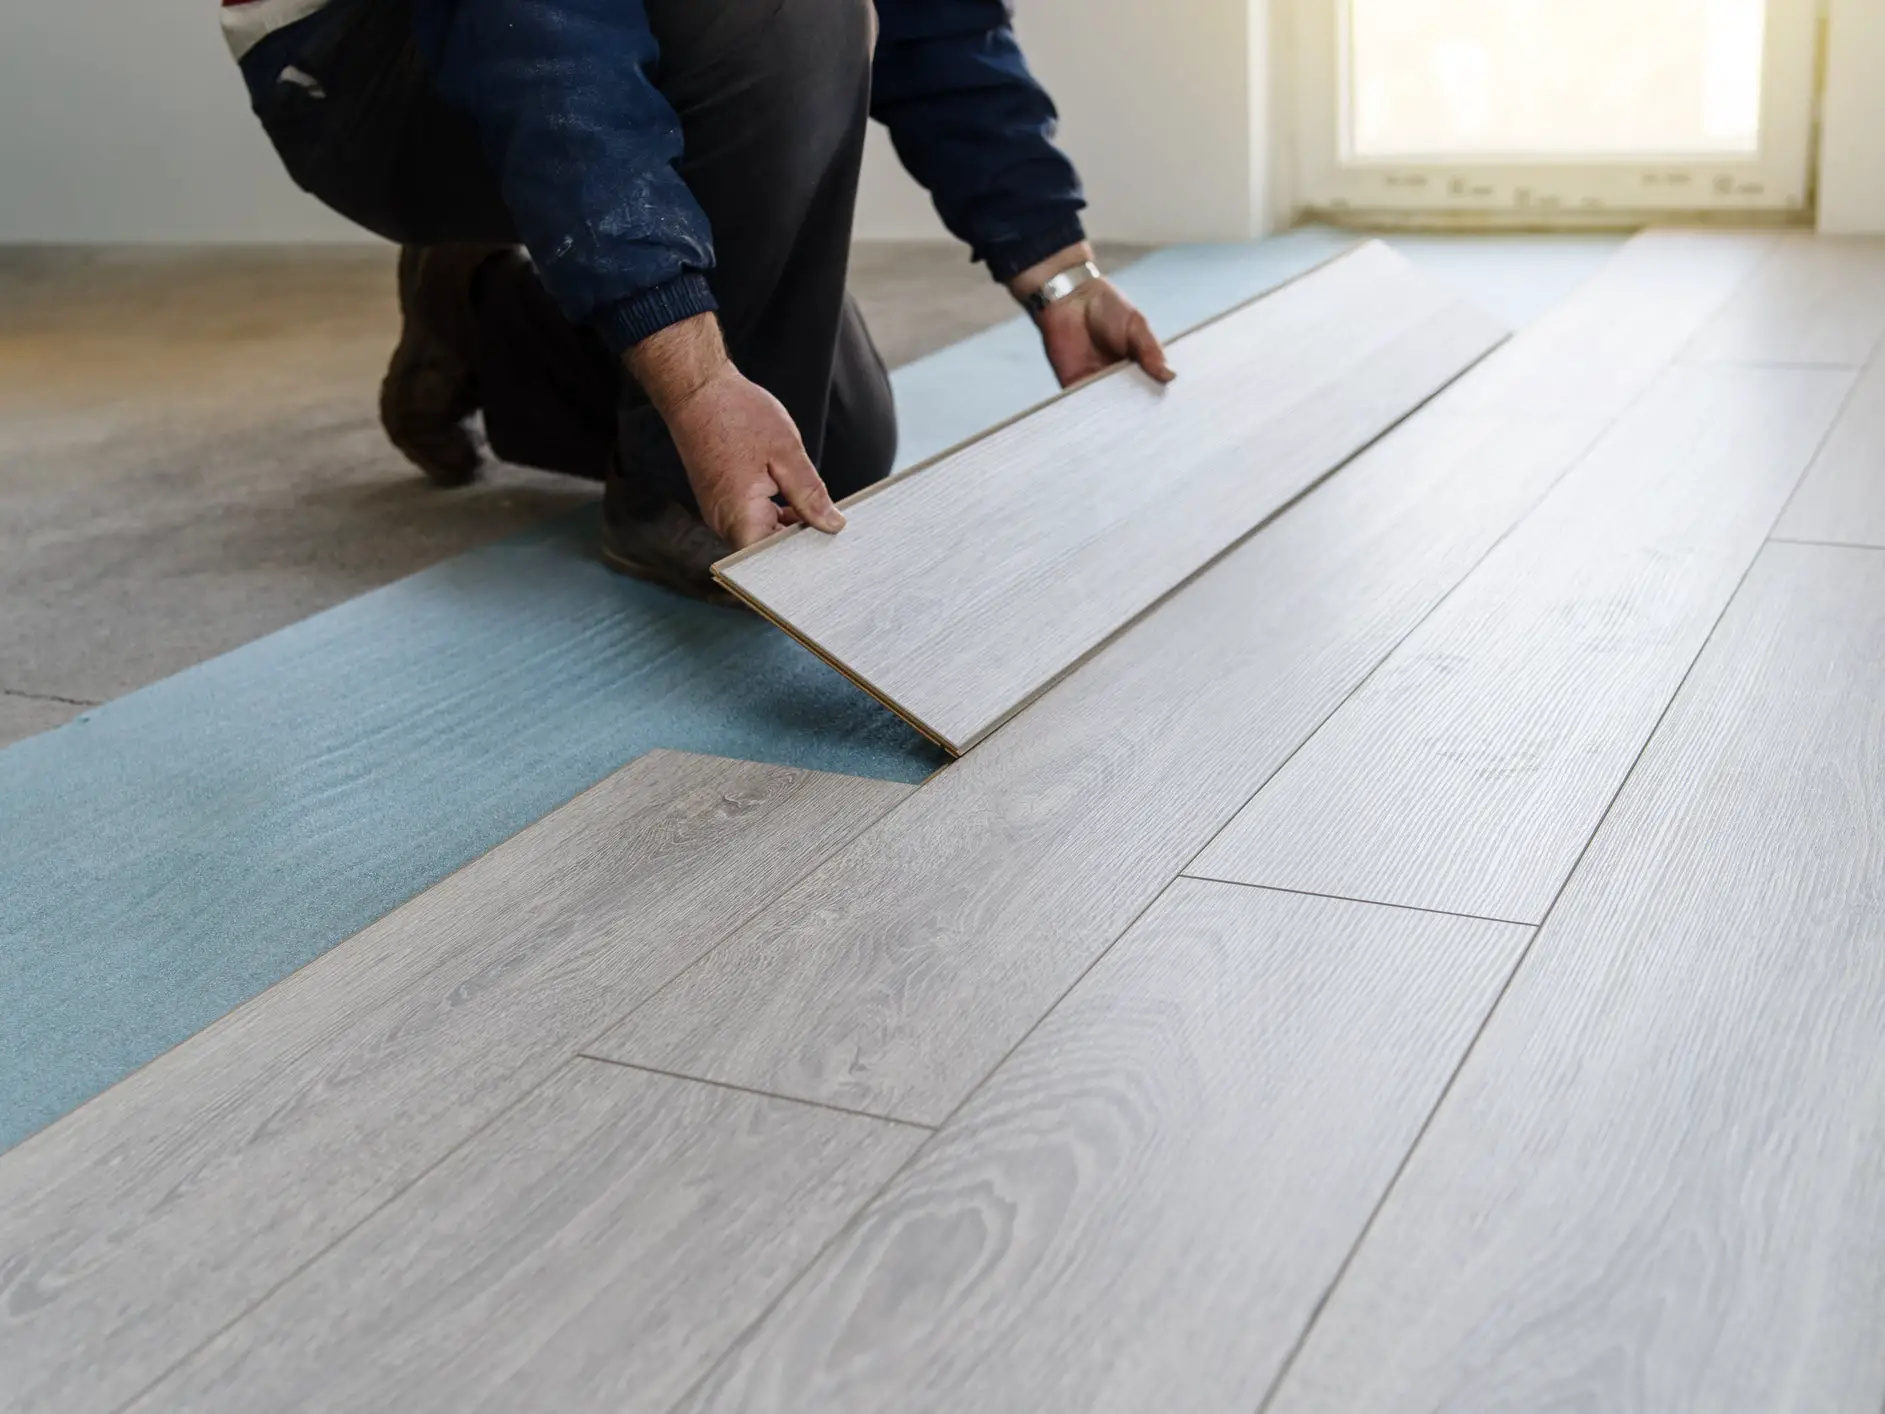 How To Install Temporary Flooring Over, How To Install Carpet Over Laminate Flooring